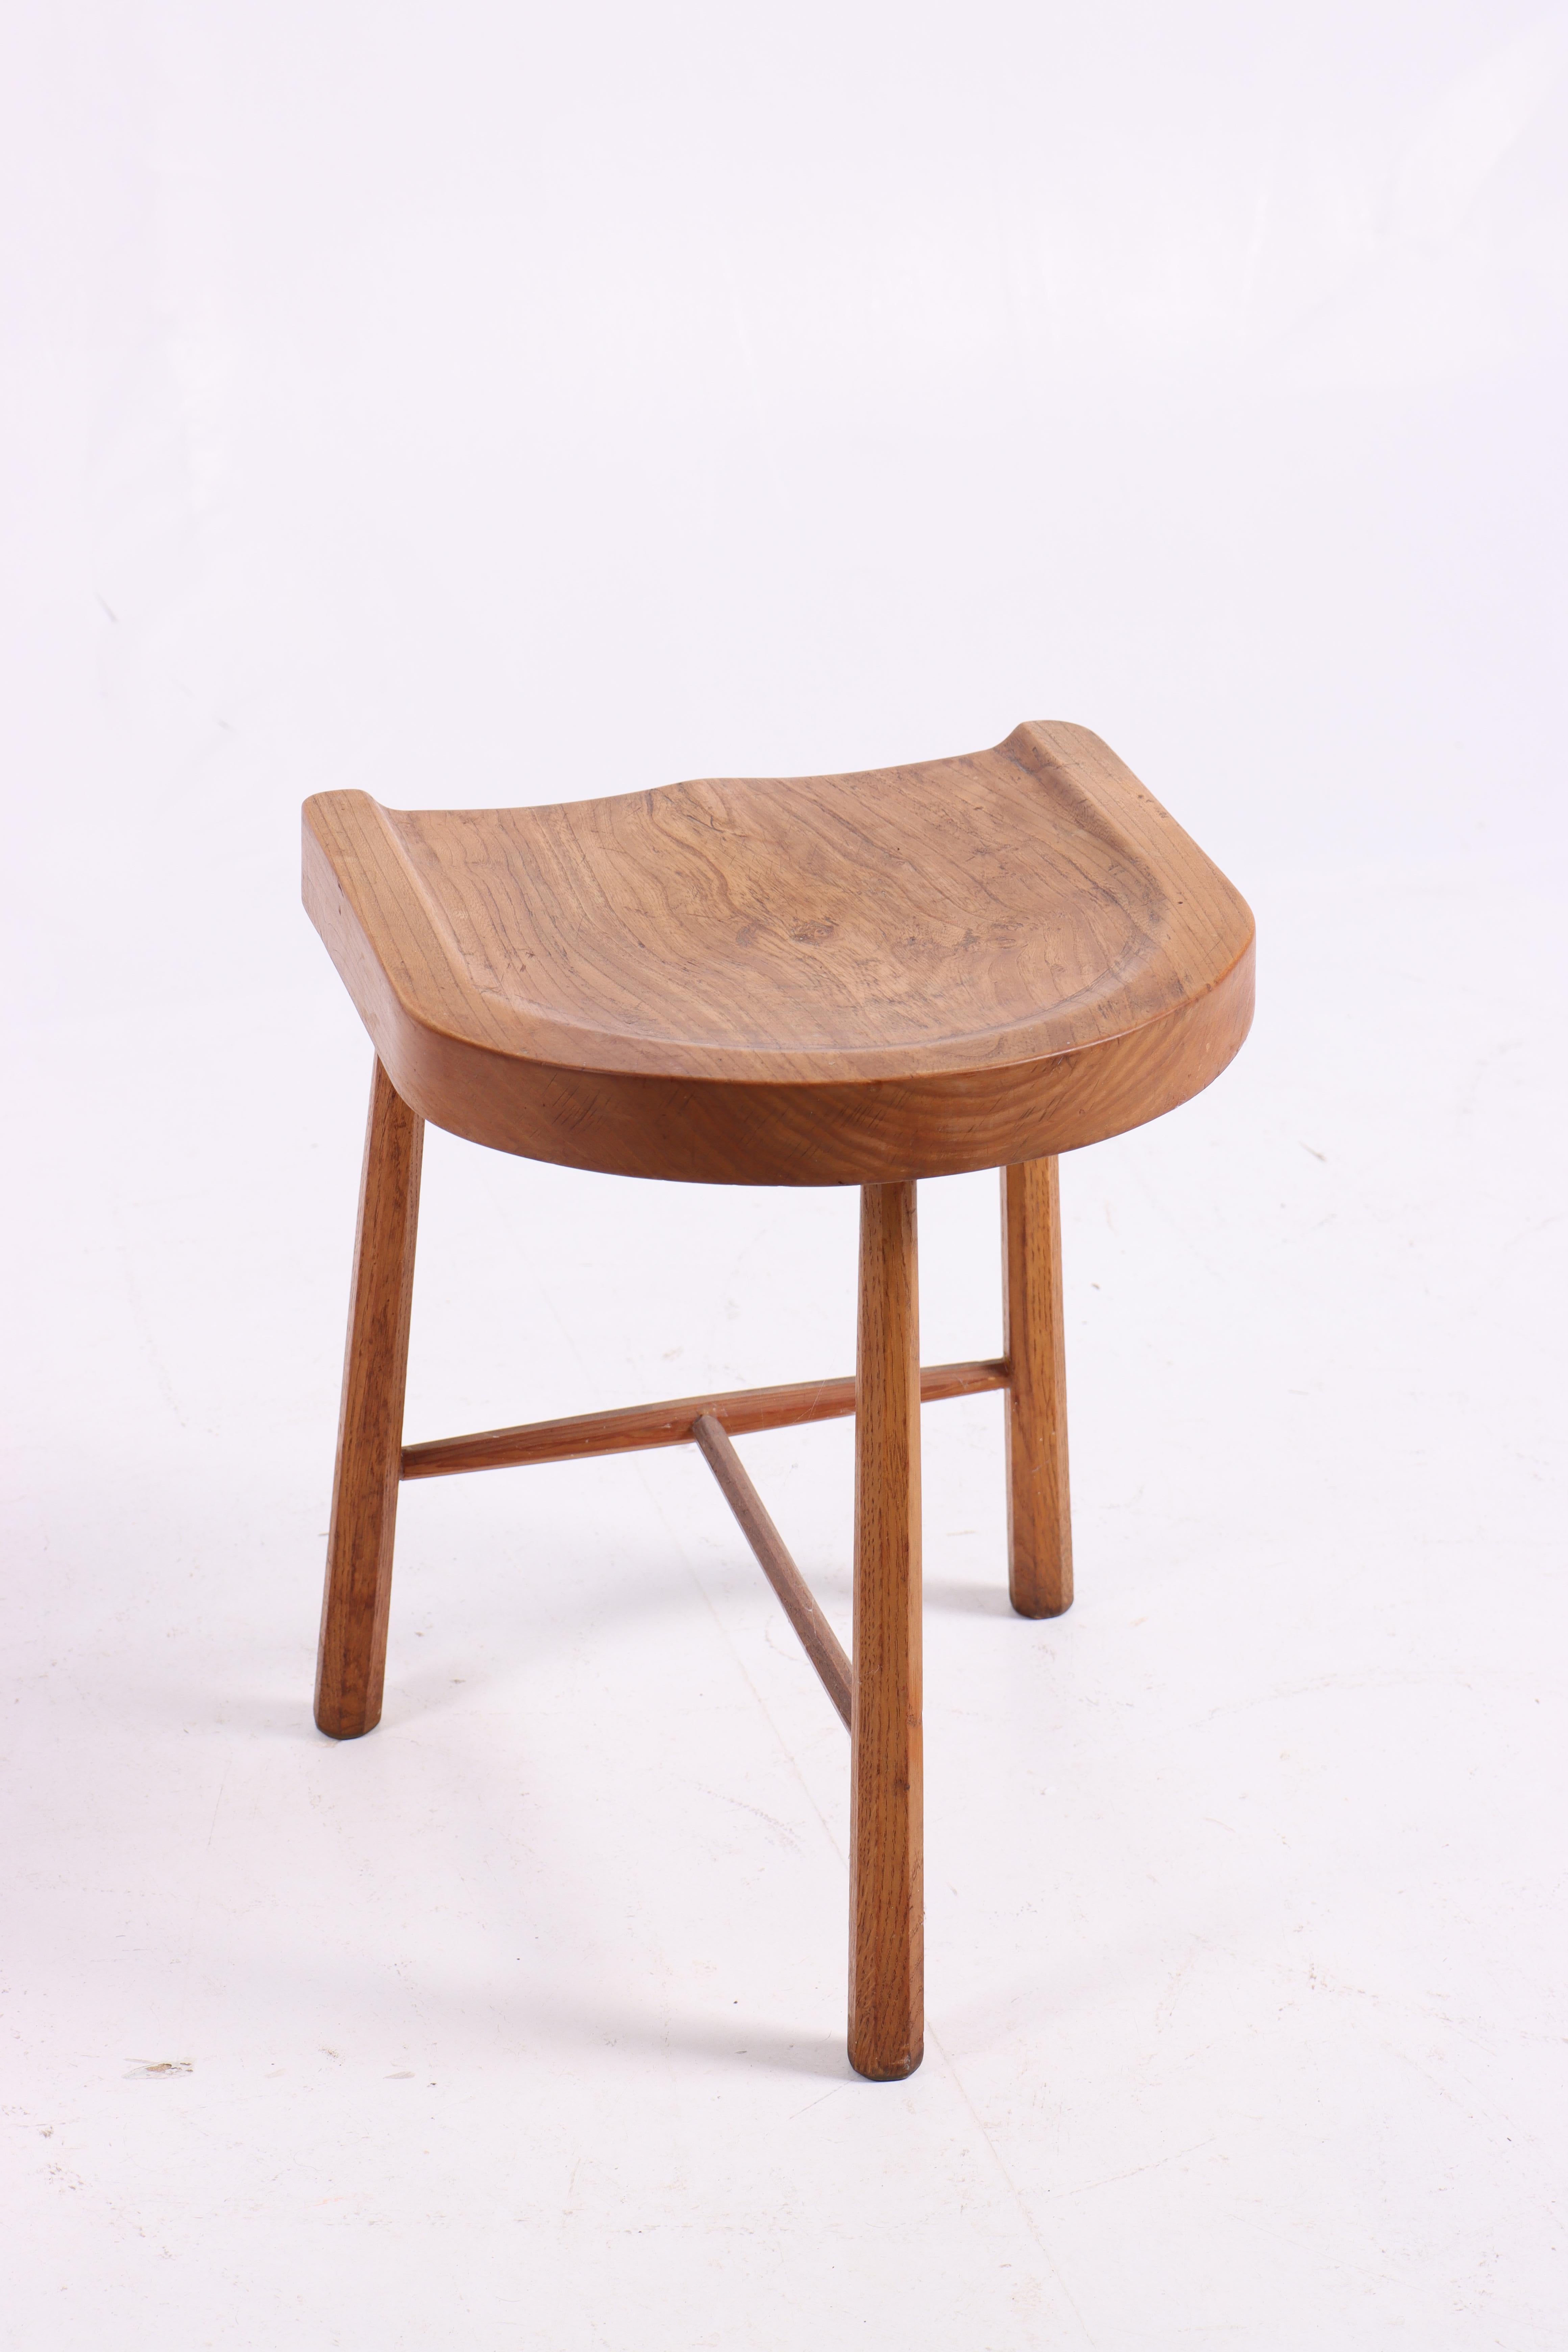 Stool in patinated oak, designed made by a danish cabinetmaker.